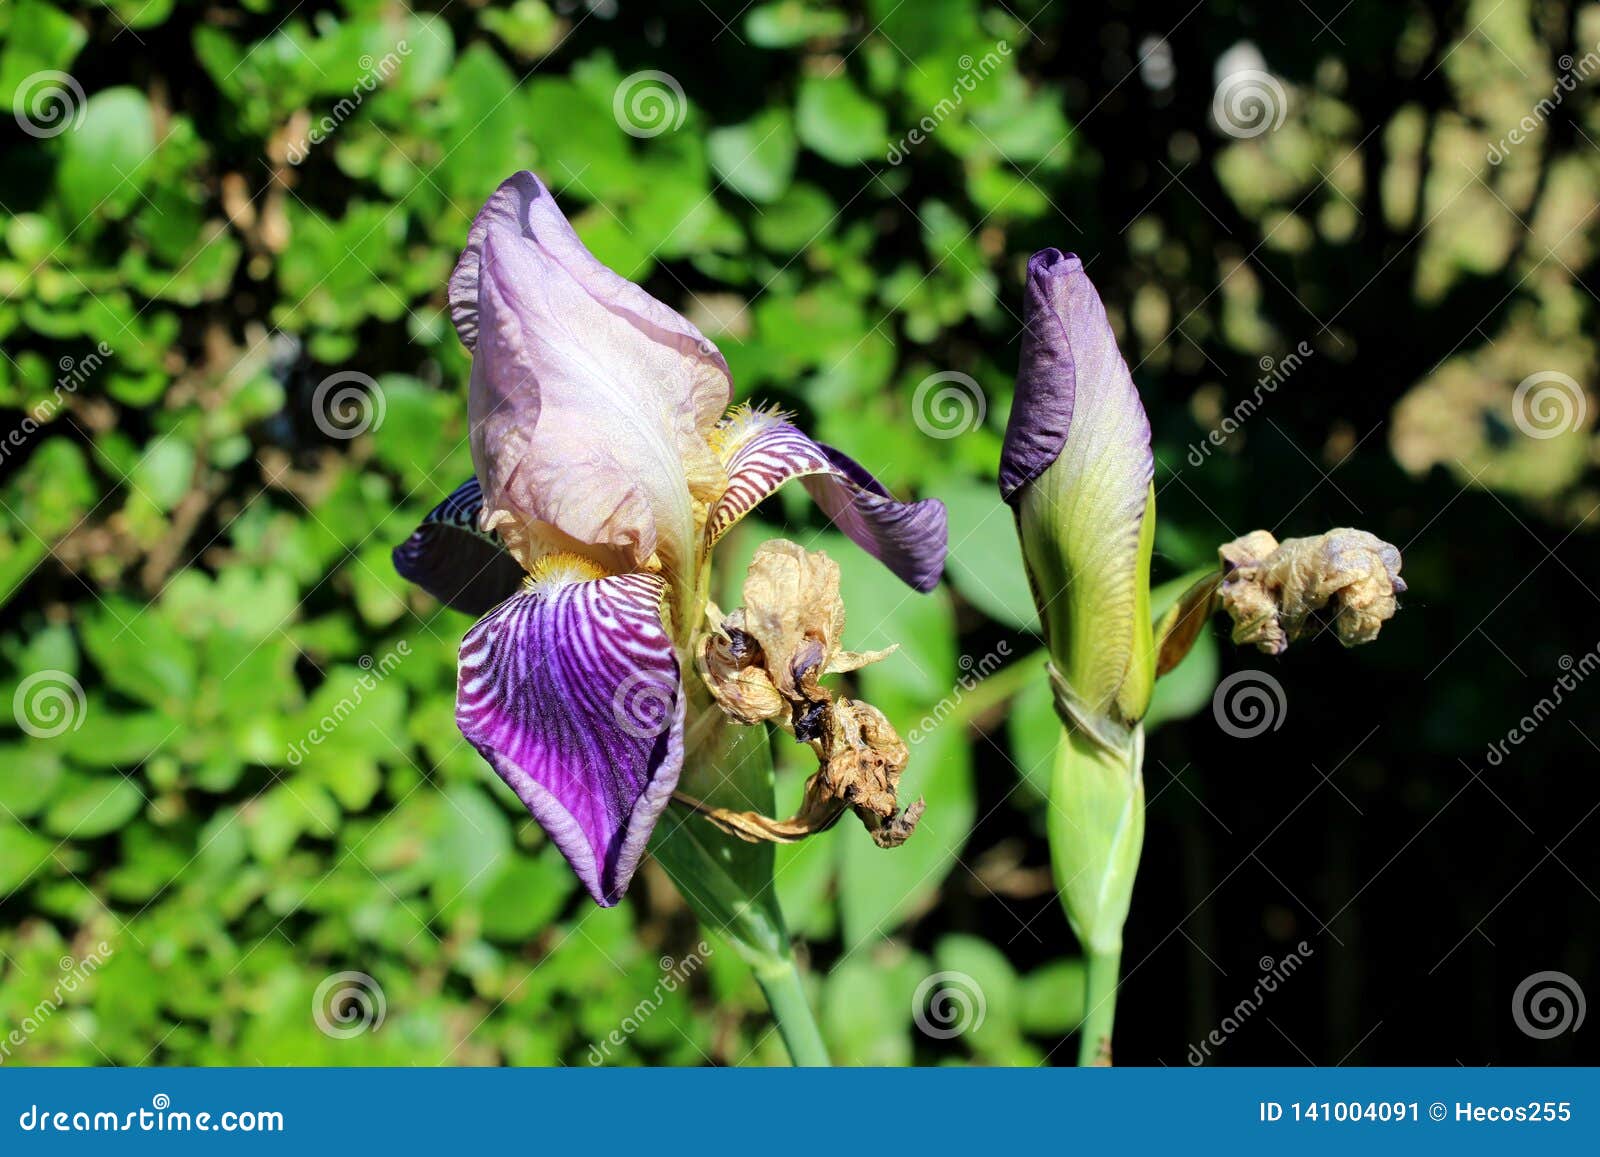 Iris Flowering Perennial Plant with Showy White To Dark Violet ...